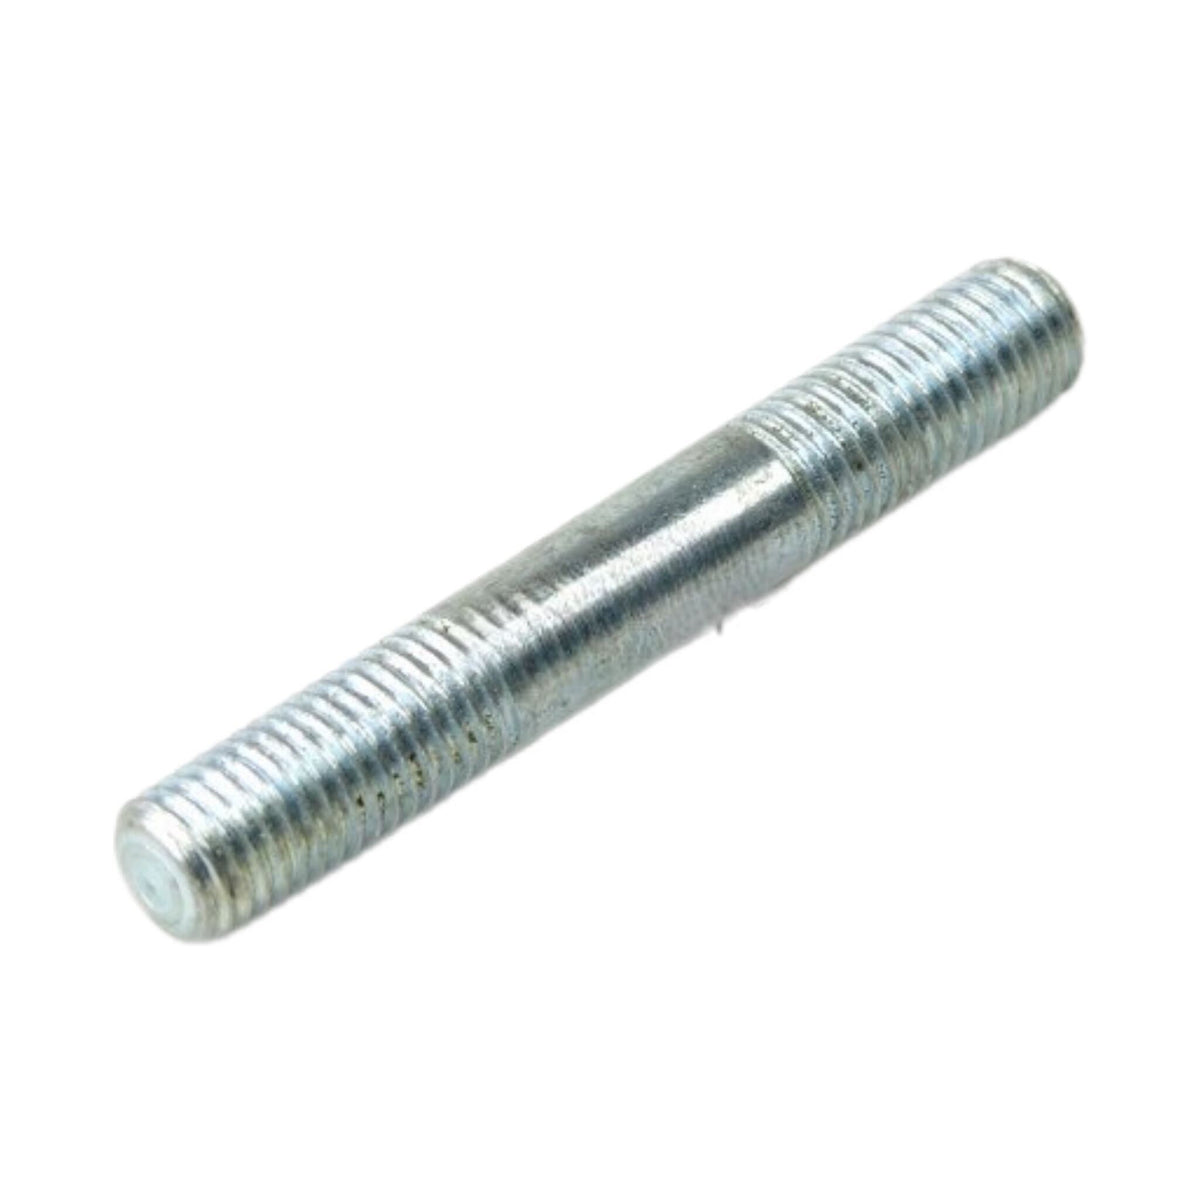 LML 4T Star Deluxe Auto Cylinder Stud